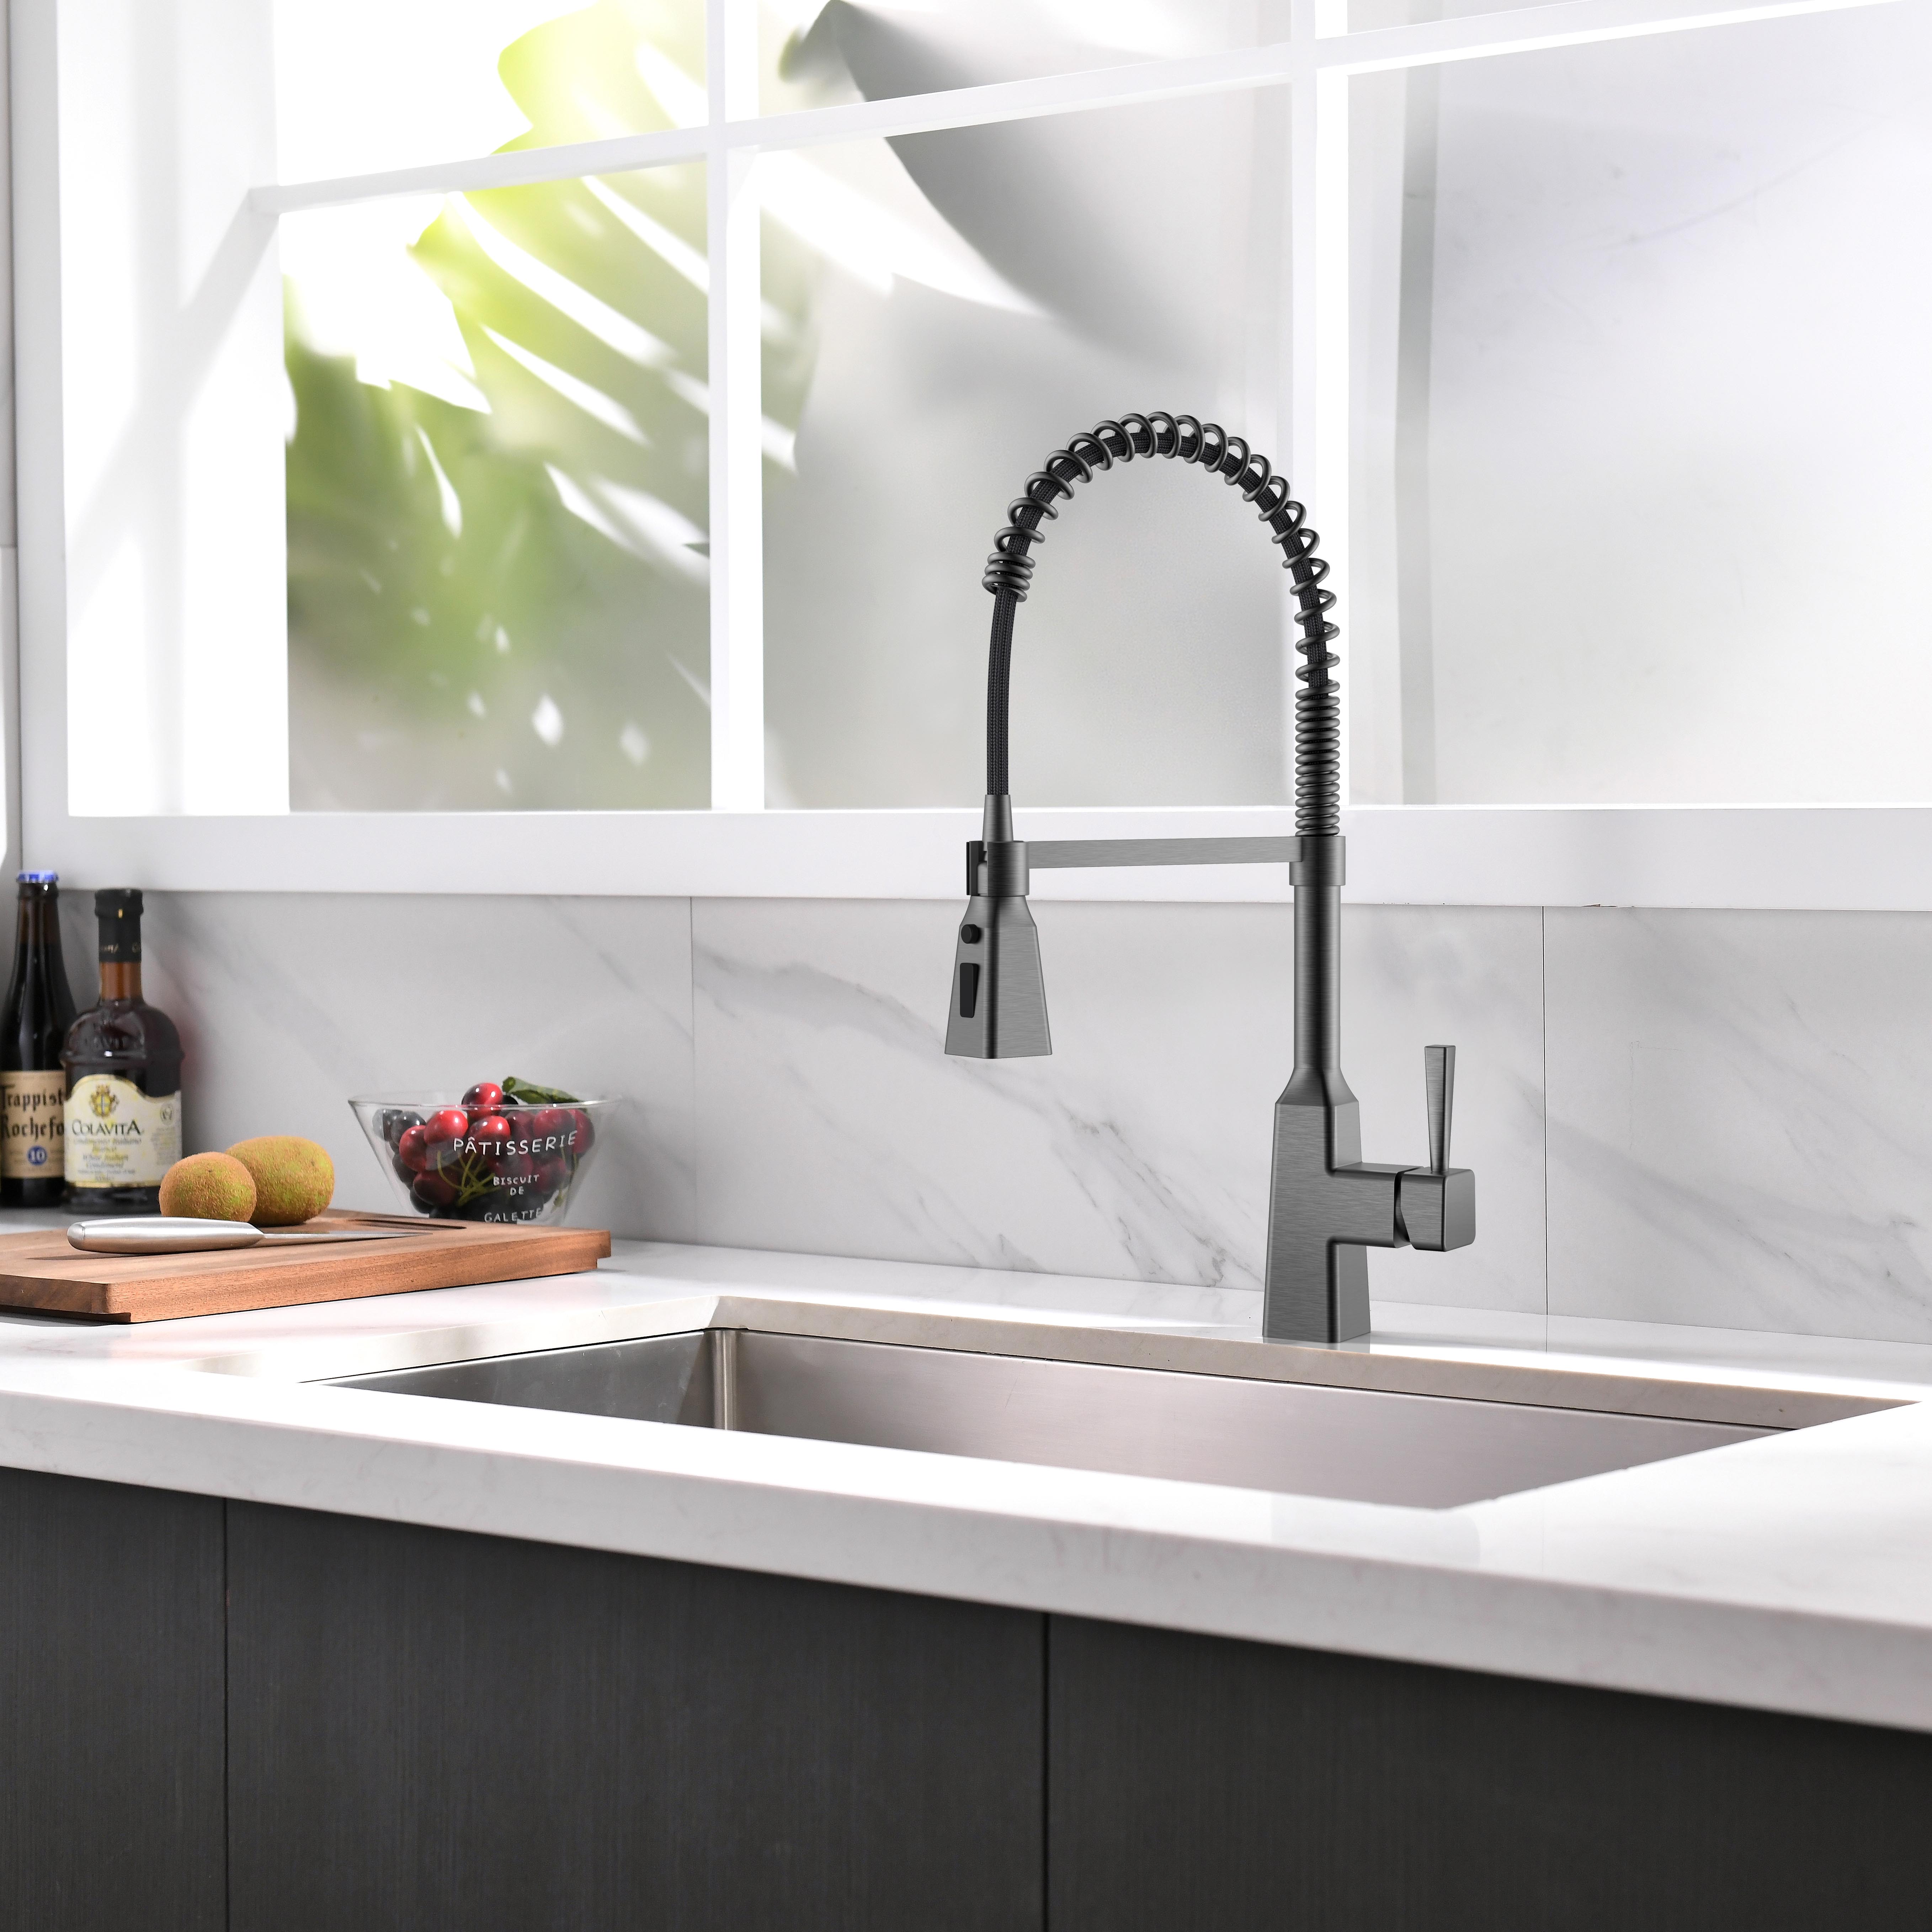 Benefits of a Brushed Nickel/Gold/Modern Kitchen Faucet